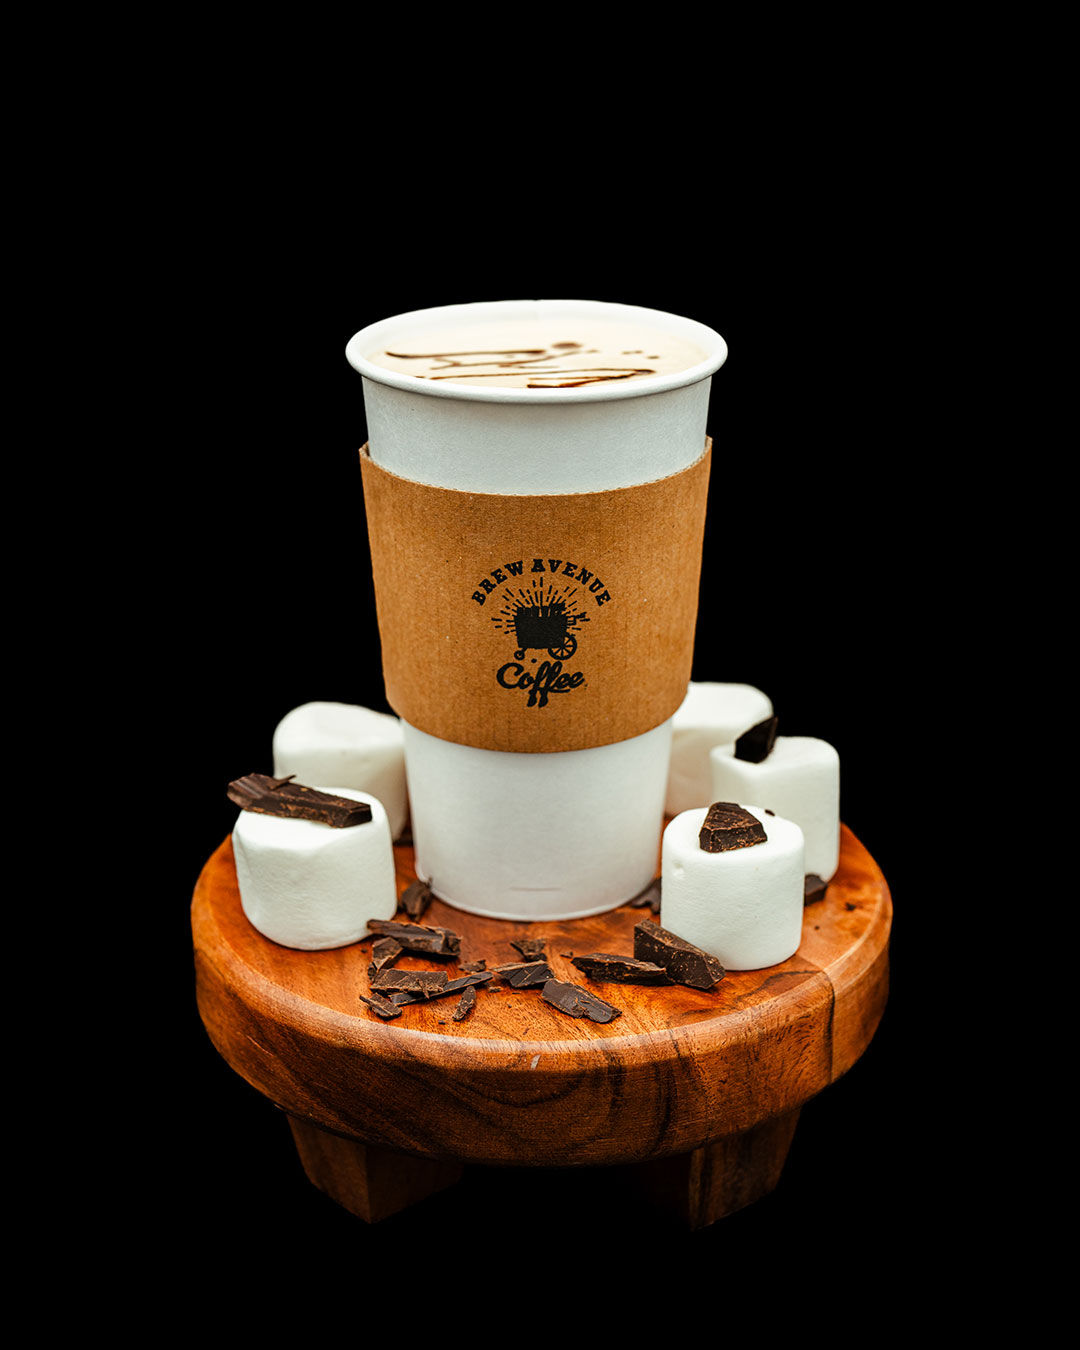 Hot Chocolate in a white cup with the Brew Avenue Coffee logo on a wooden stool. Marshmallows with chocolate chips and shavings also sit on top of the stool.